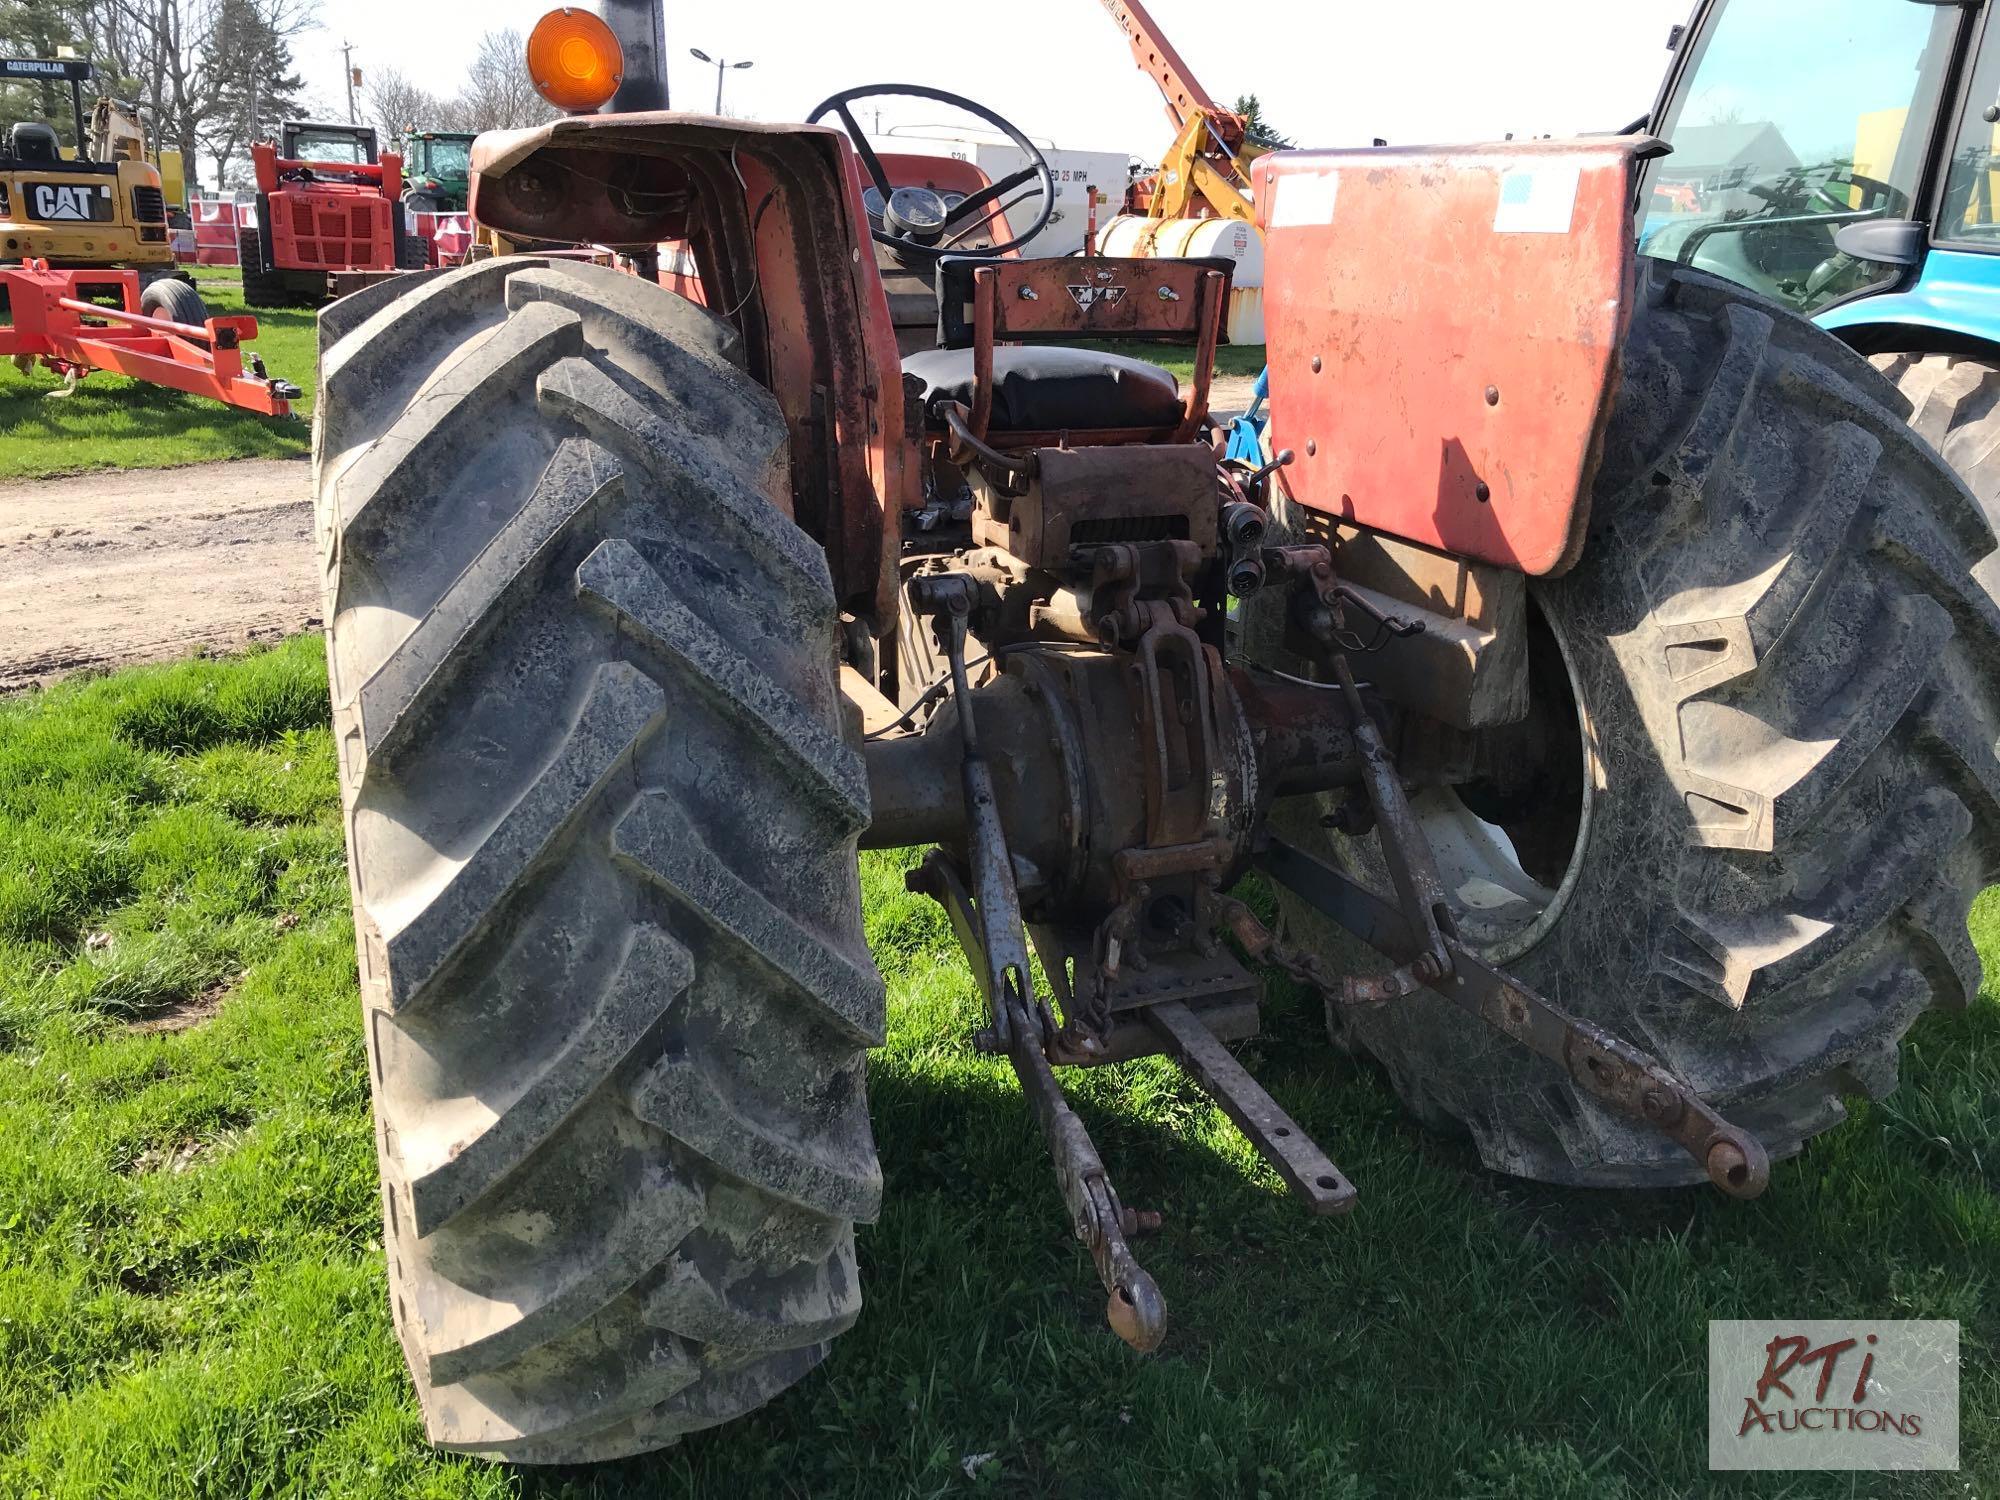 Massey Ferguson 165 diesel tractor with lift arms, draw bar, PTO. 6382 hrs